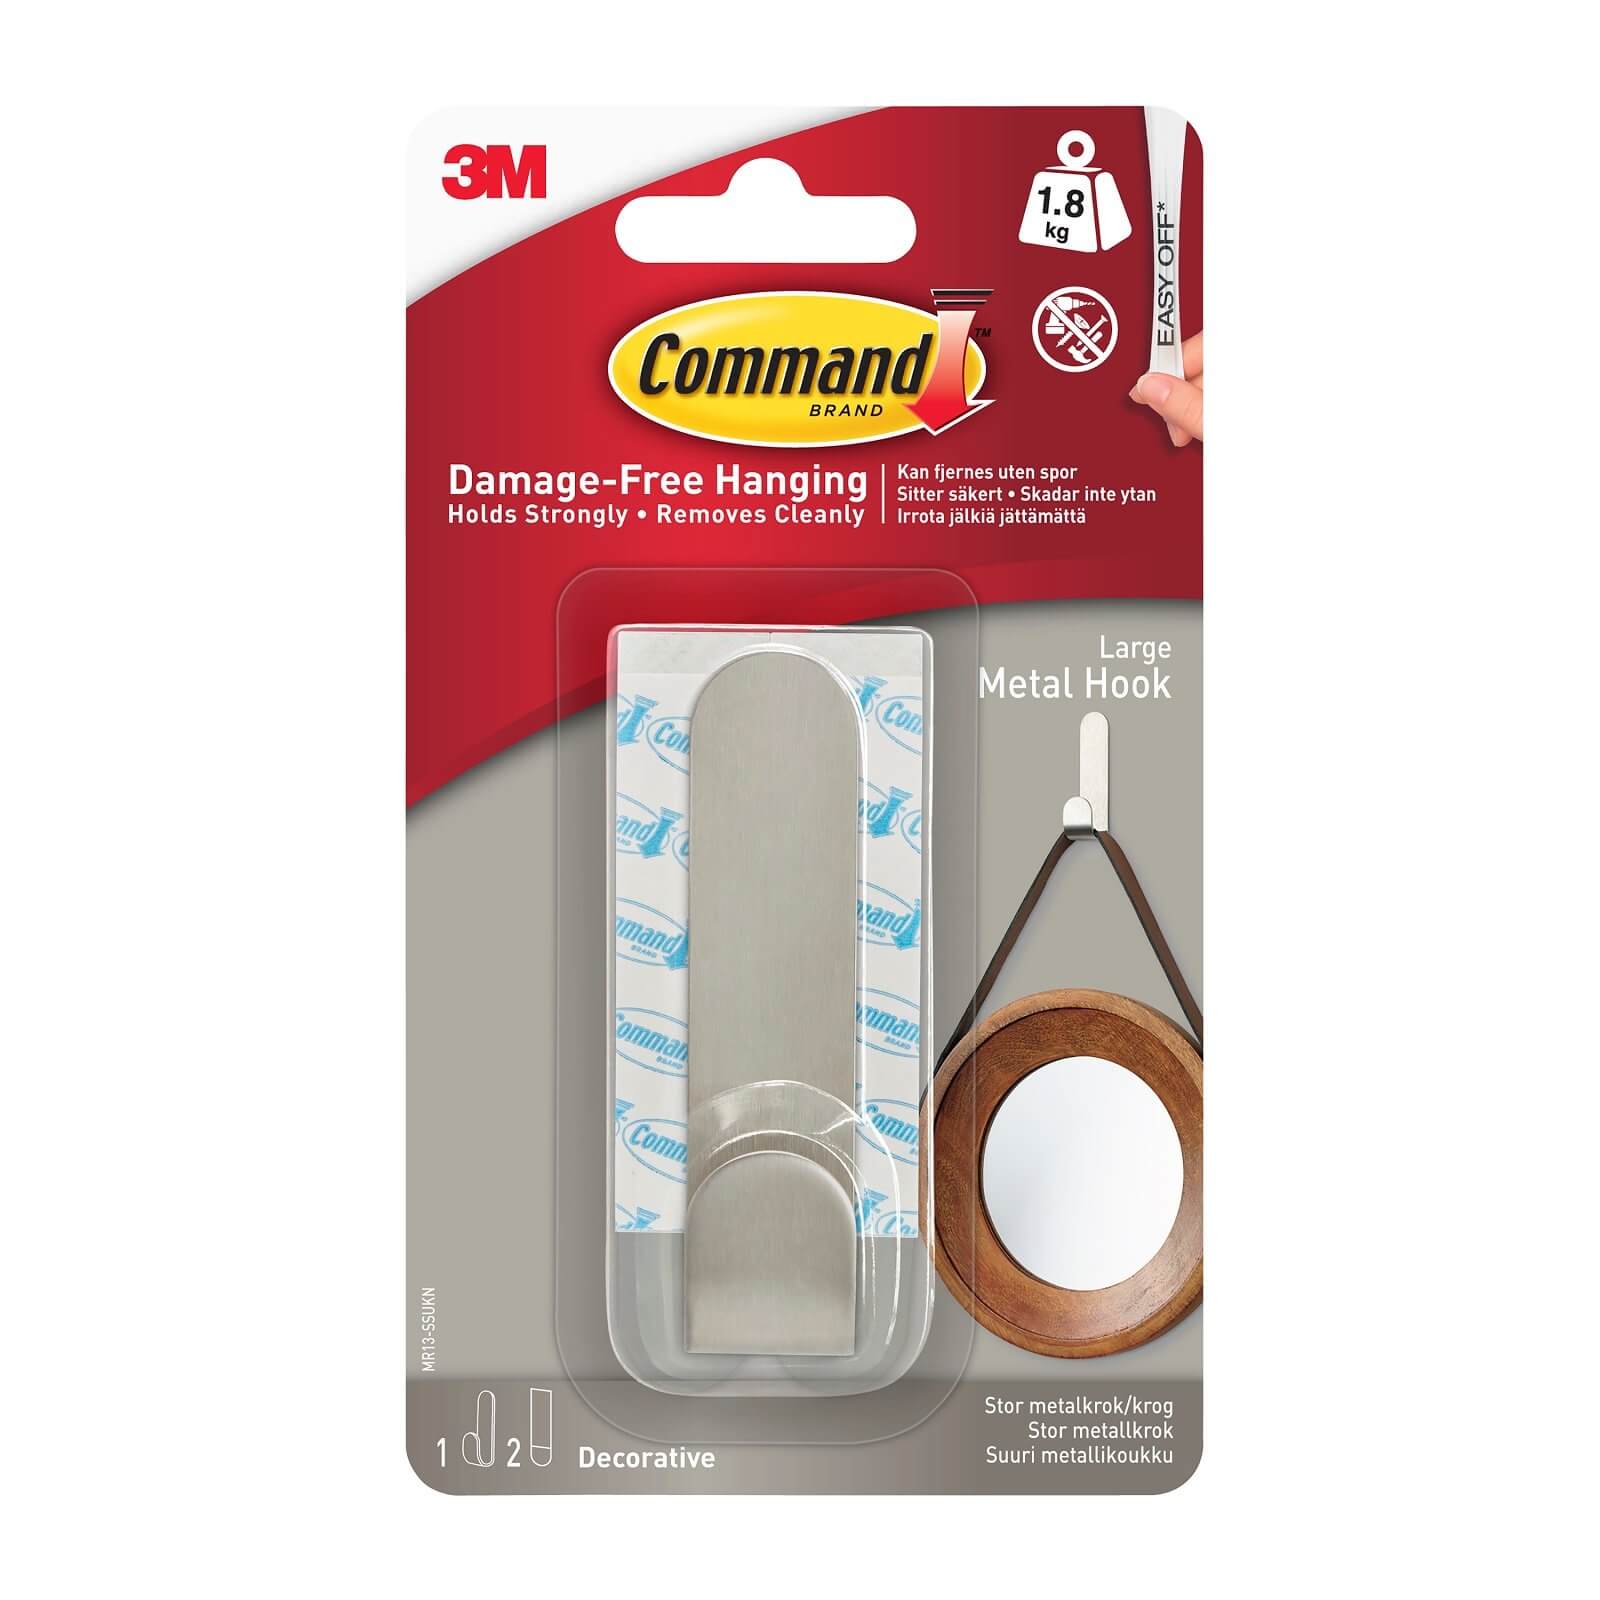 Adhesive Hooks, Clips, Strips, Value Packs & More